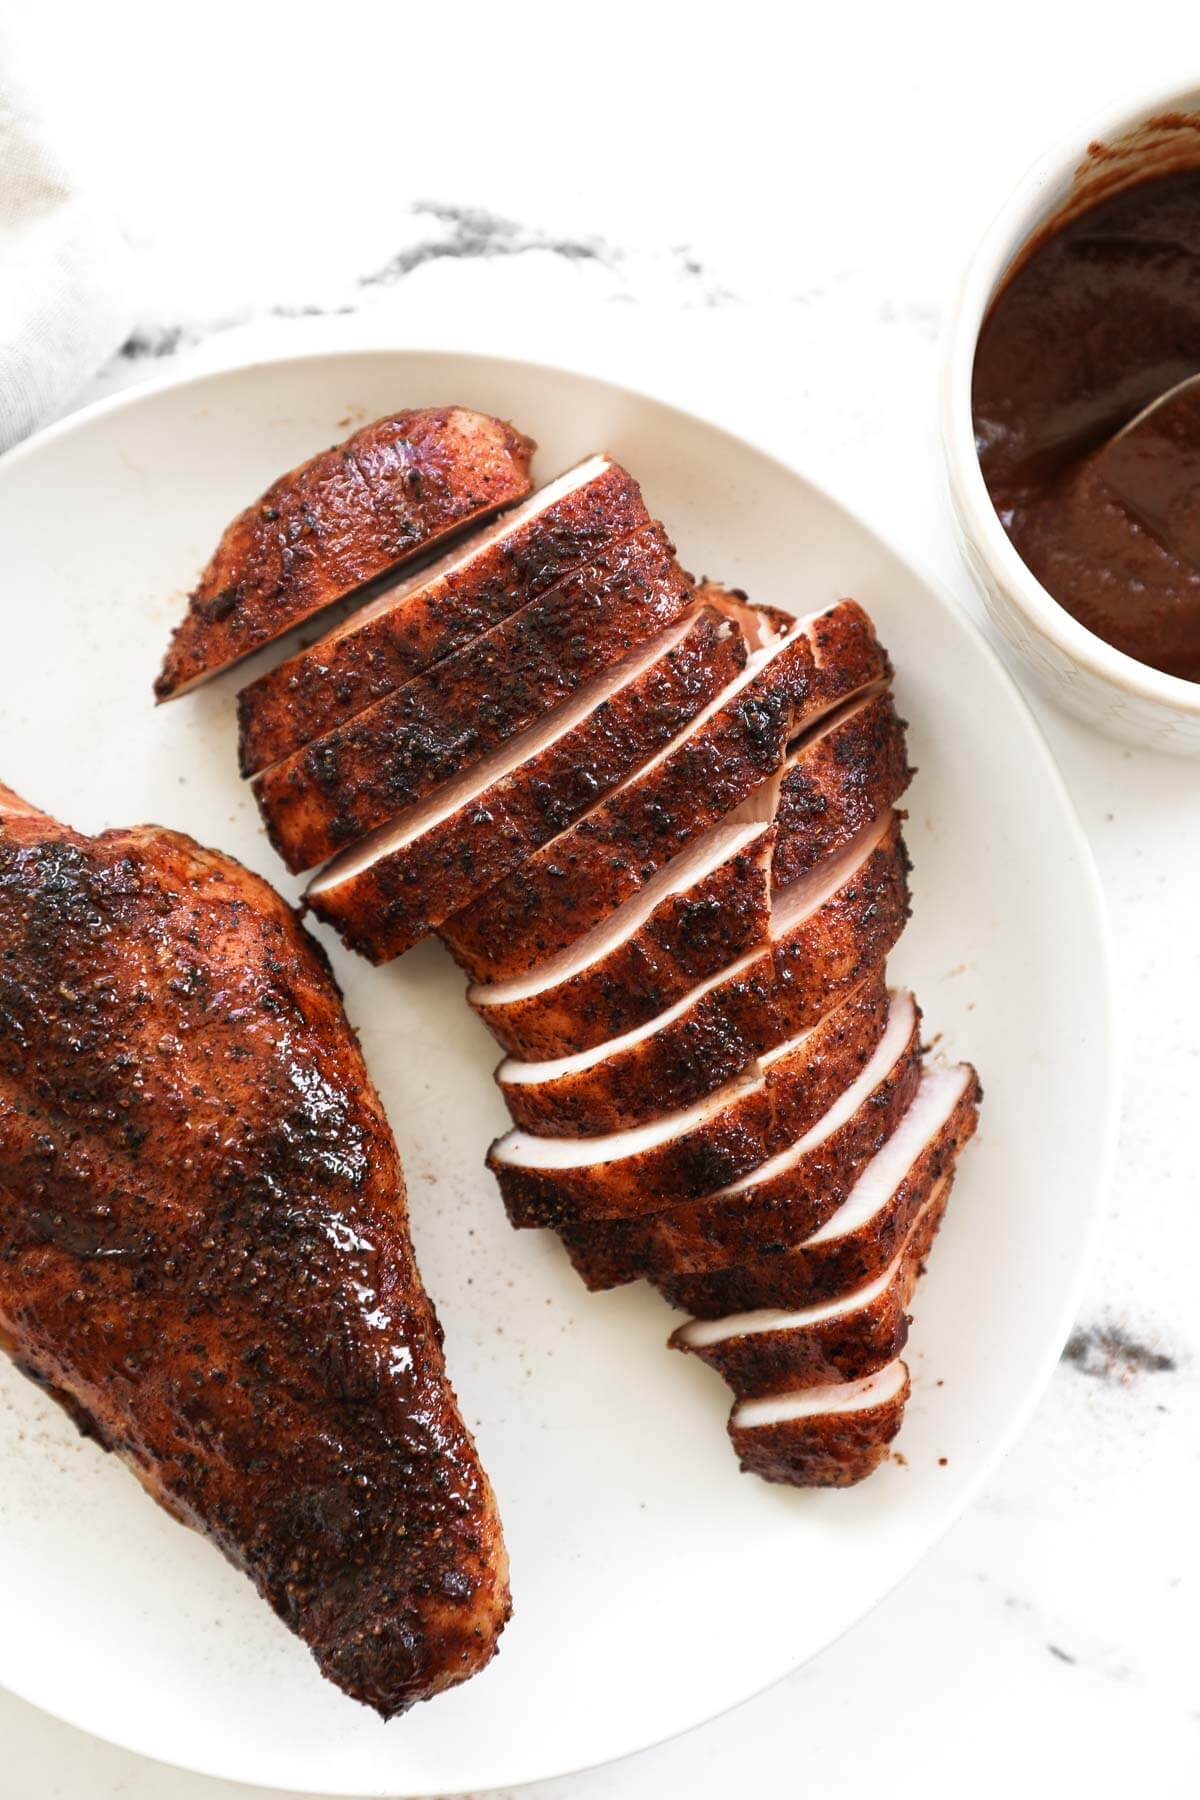 Two pieces of smoked chicken breast on a plate. One piece sliced into strips. BBQ sauce in a small bowl on the side.